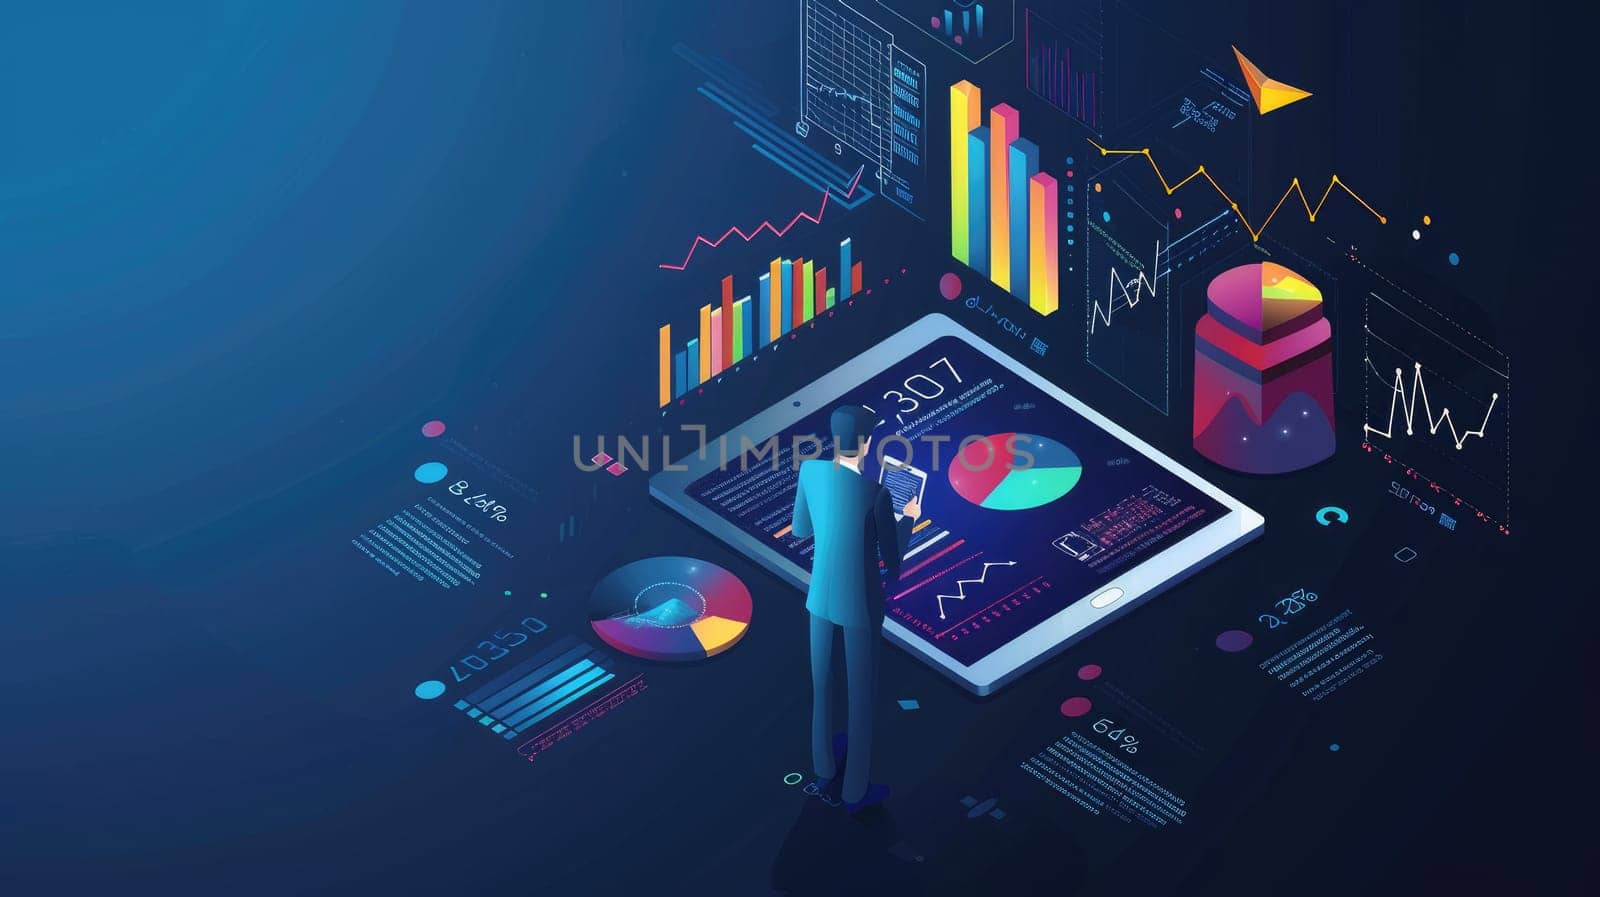 Modern Business Growth Concept - Businessman Analyzing Financial Graphs on Digital Tablet Isometric Illustration with Copy Space for Text Decoration..